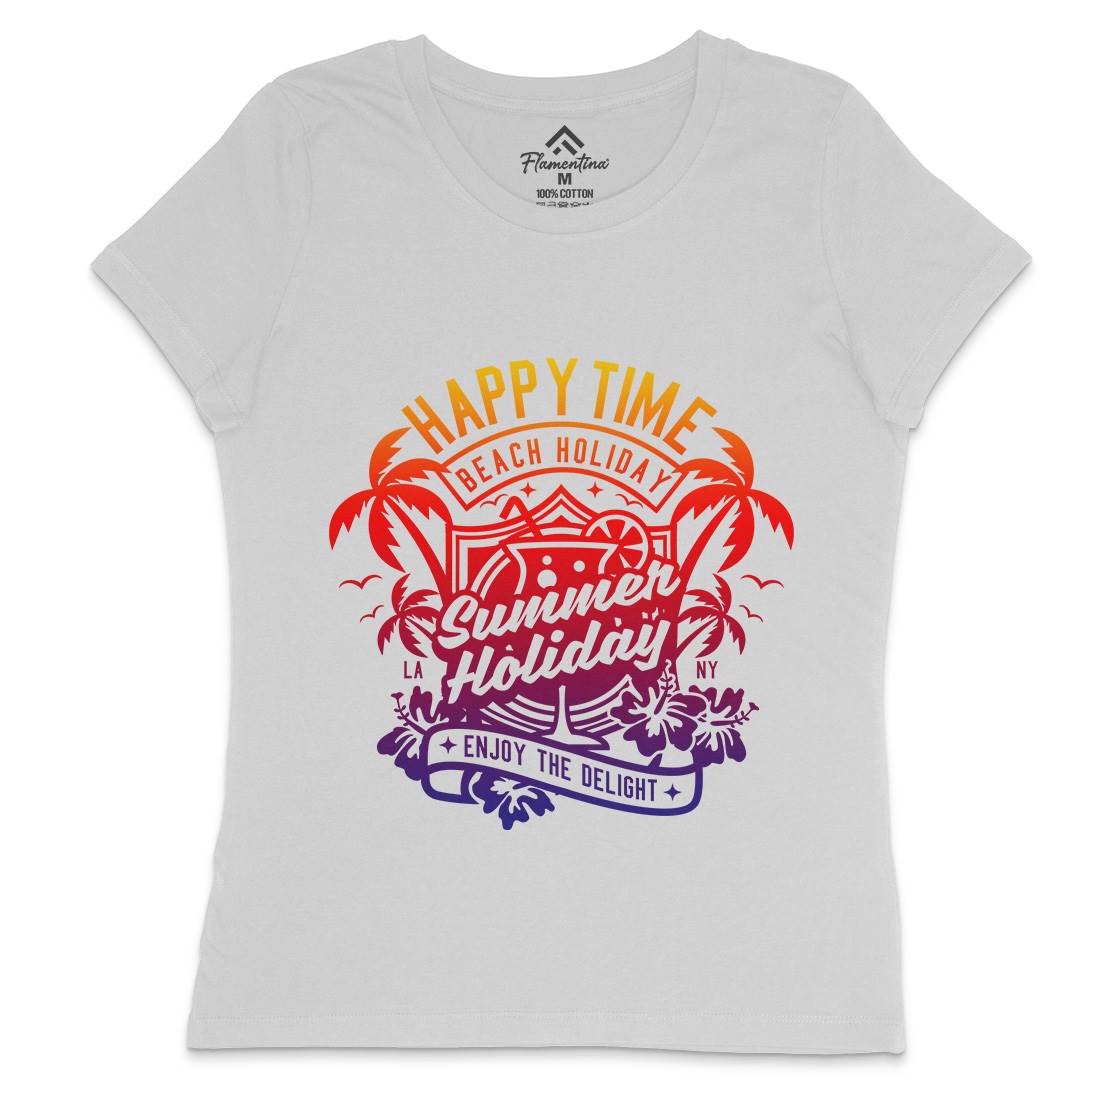 Happy Time Womens Crew Neck T-Shirt Surf A238